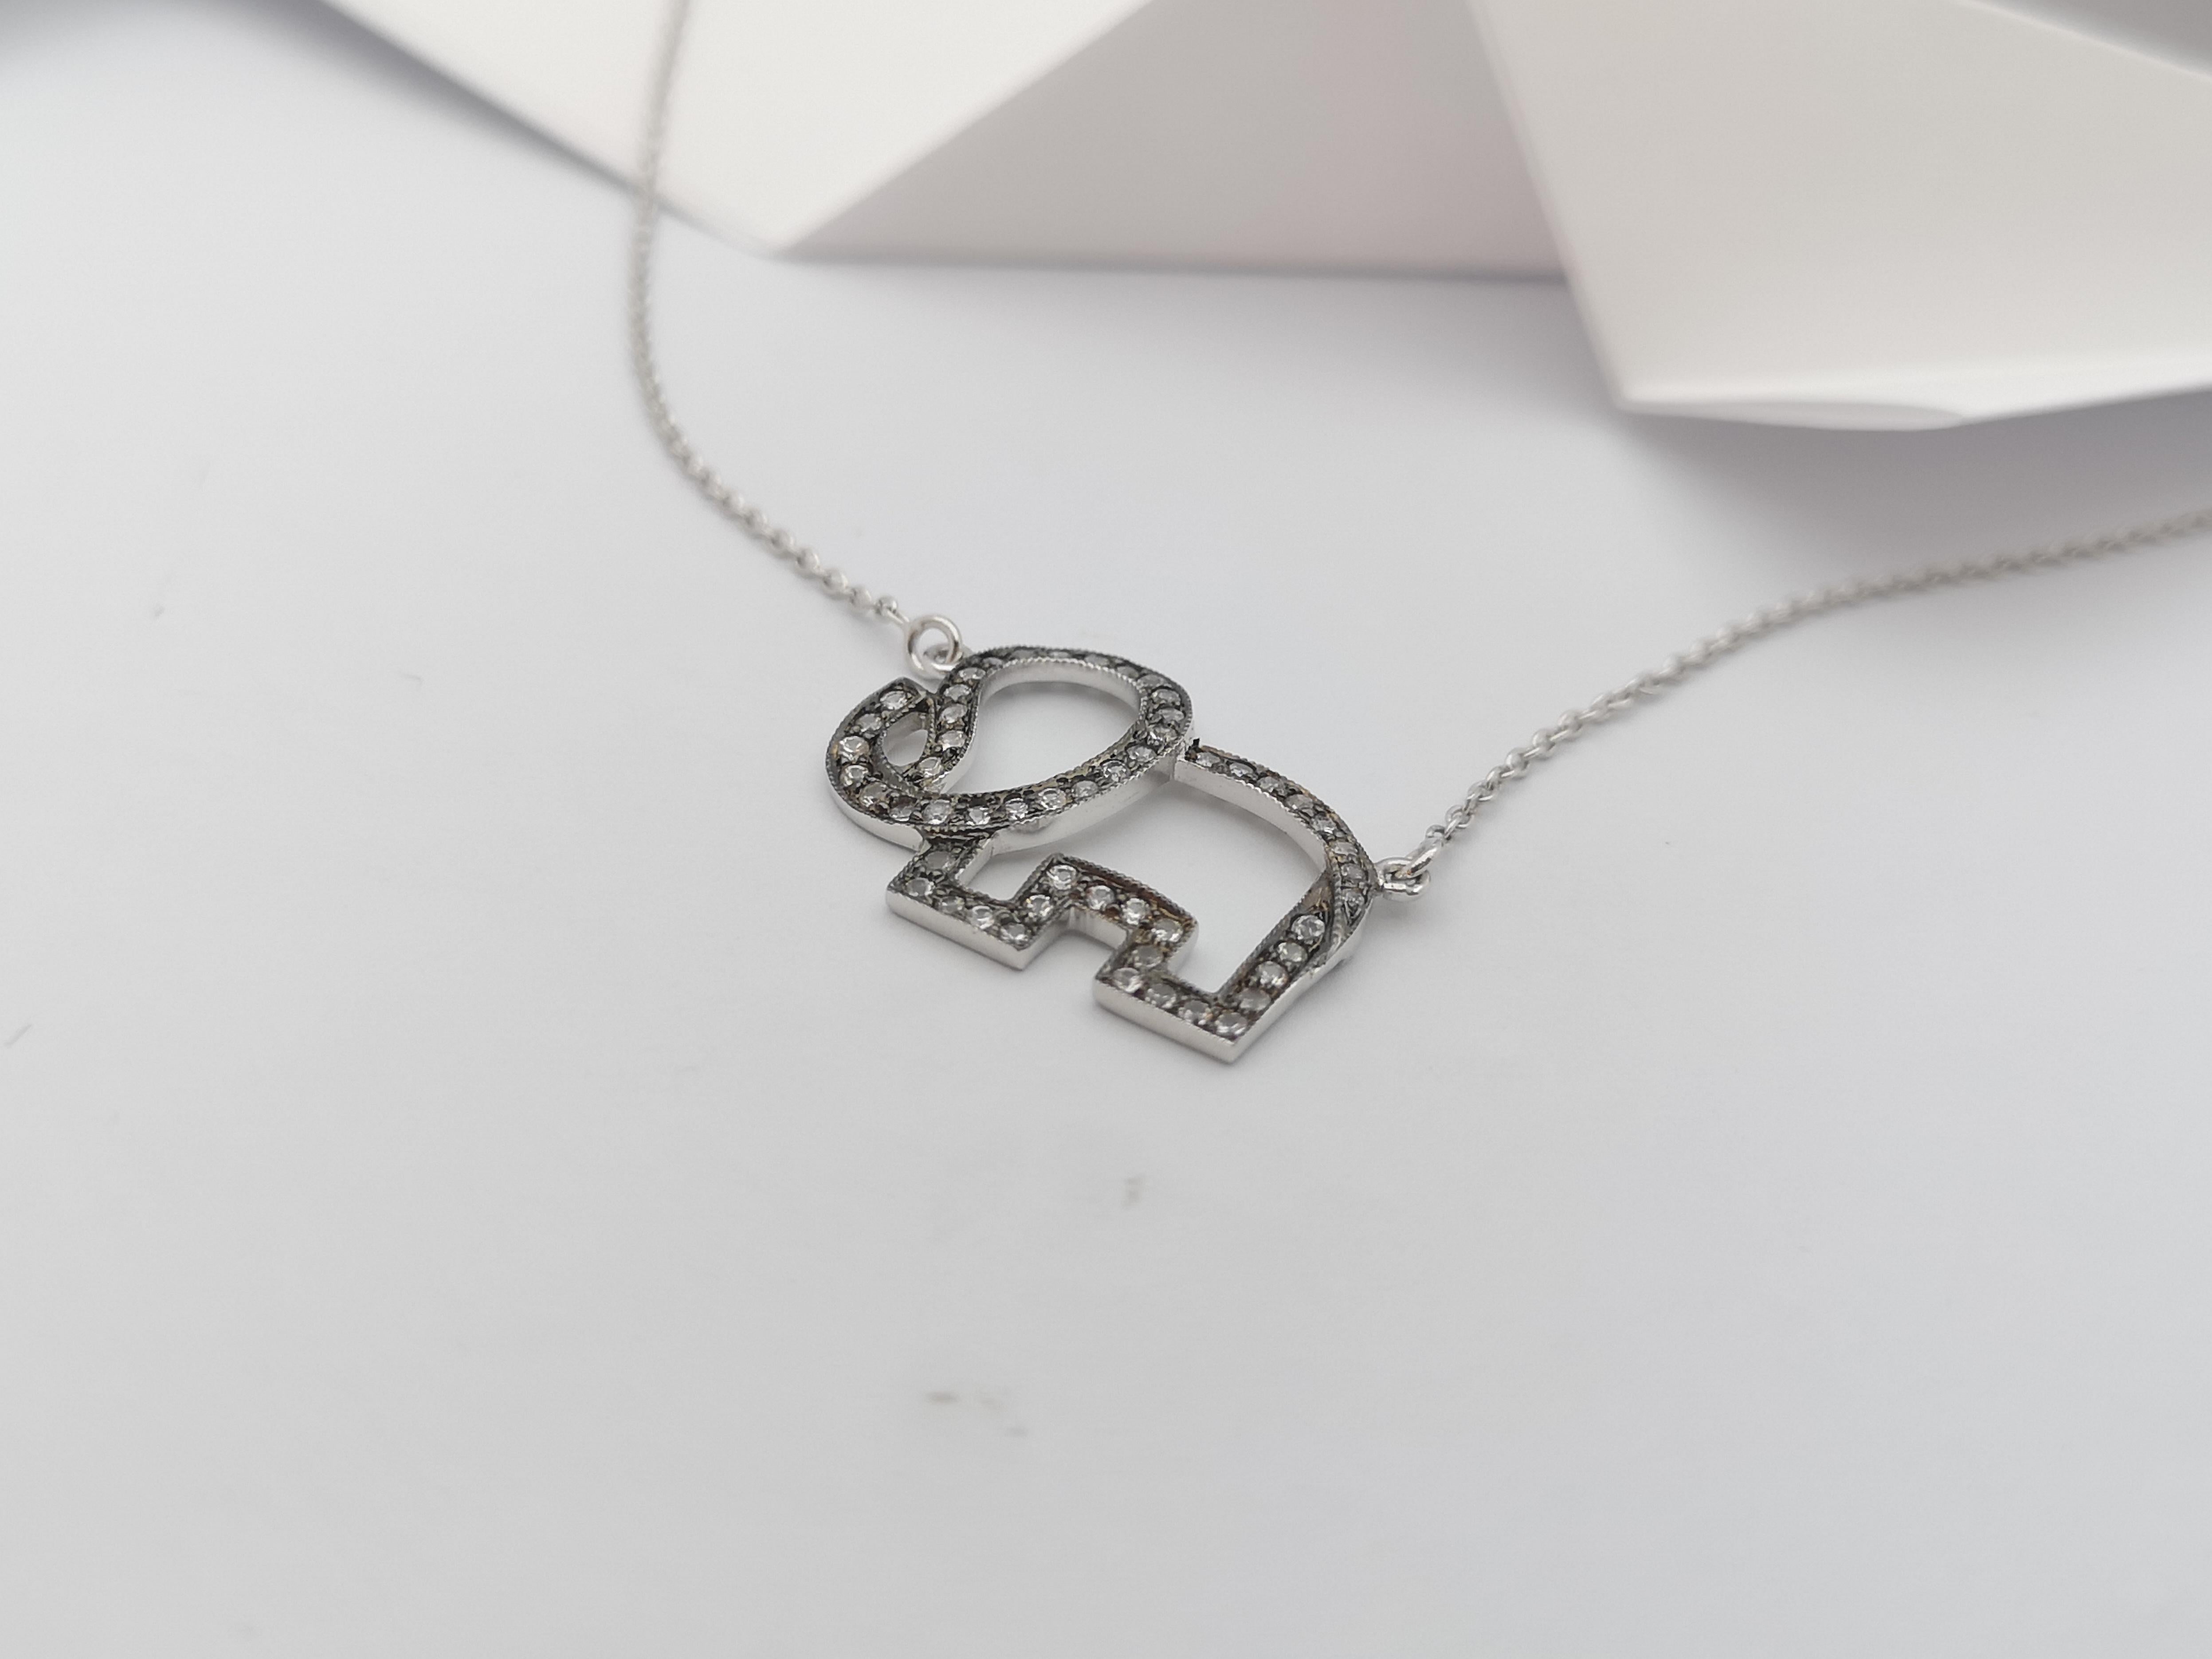 White Sapphire Necklace set in Silver Settings

Width:  1.9 cm 
Length:  46.0 cm
Total Weight: 3.37 grams

*Please note that the silver setting is plated with rhodium to promote shine and help prevent oxidation.  However, with the nature of silver,